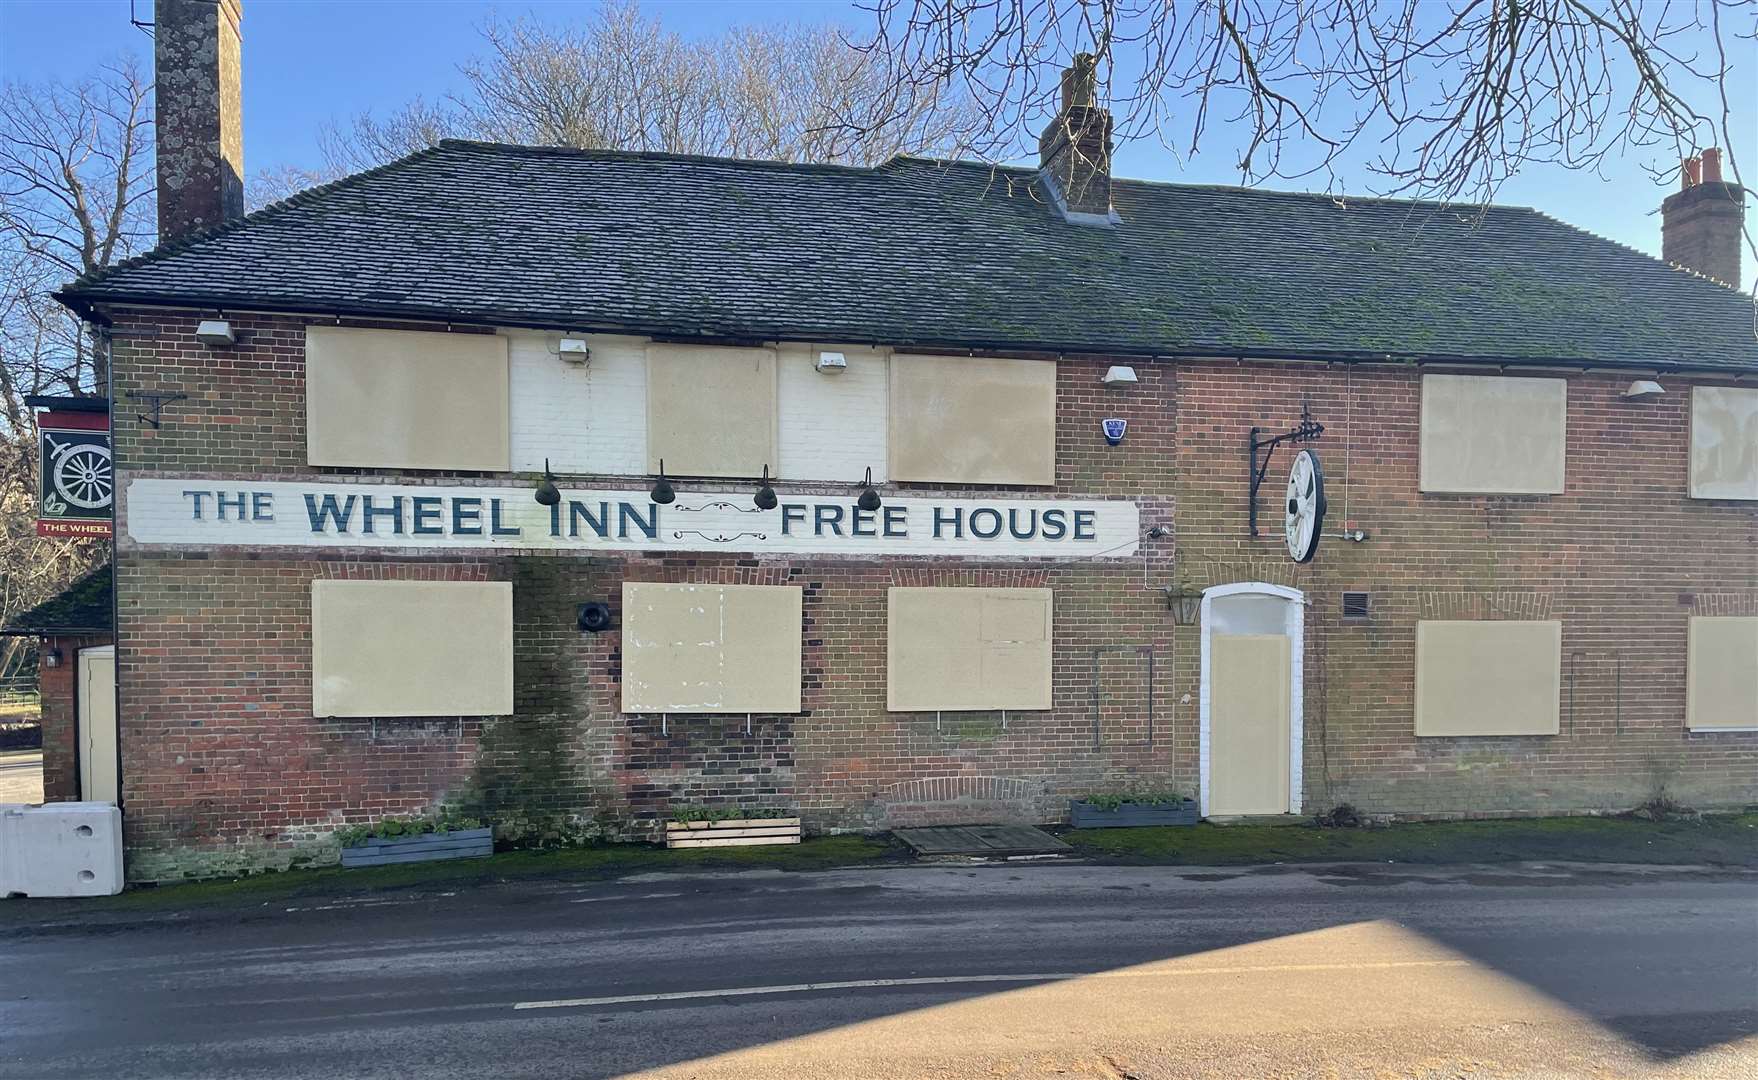 The Wheel Inn was boarded up earlier this week